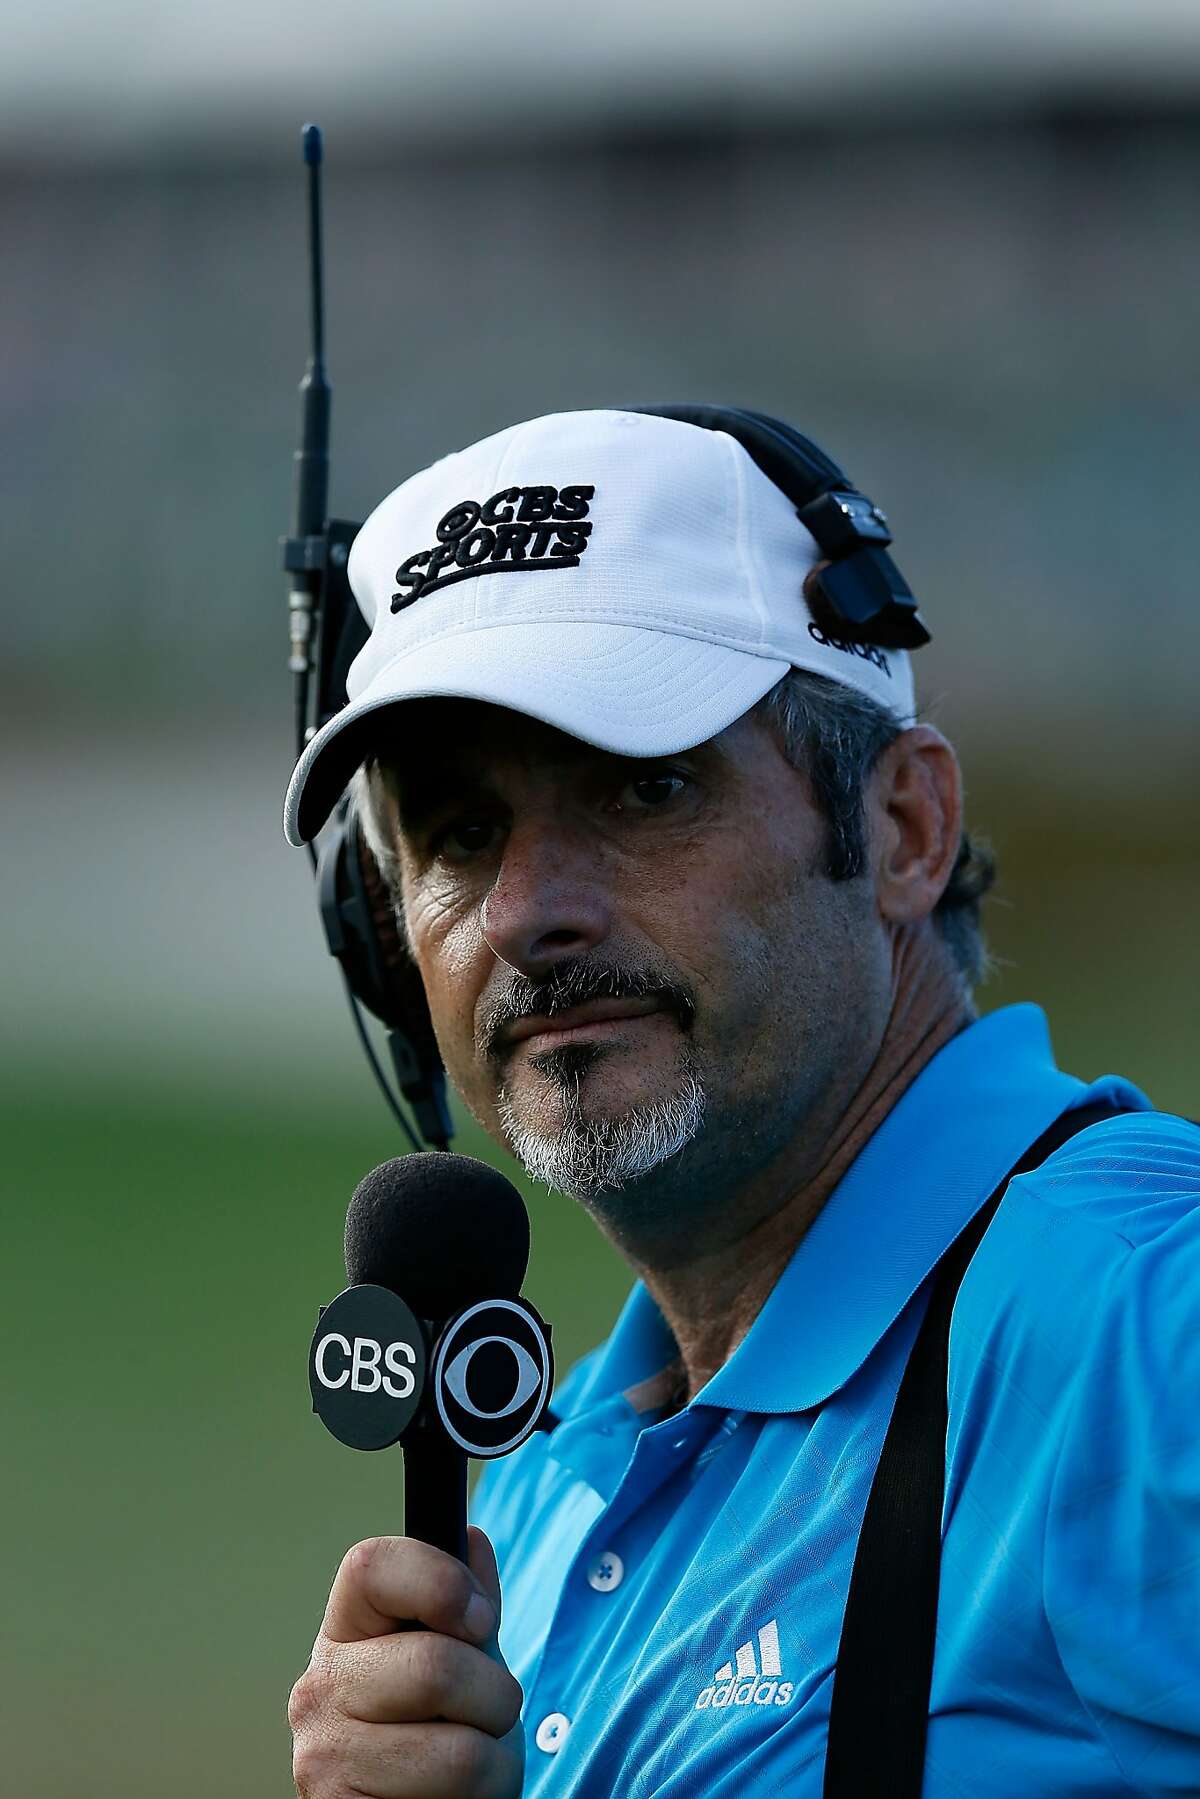 FARMINGDALE, NY - AUGUST 26: David Feherty works for CBS Sports during the final round of The Barclays at the Black Course at Bethpage State Park August 26, 2012 in Farmingdale, New York. (Photo by Scott Halleran/Getty Images)